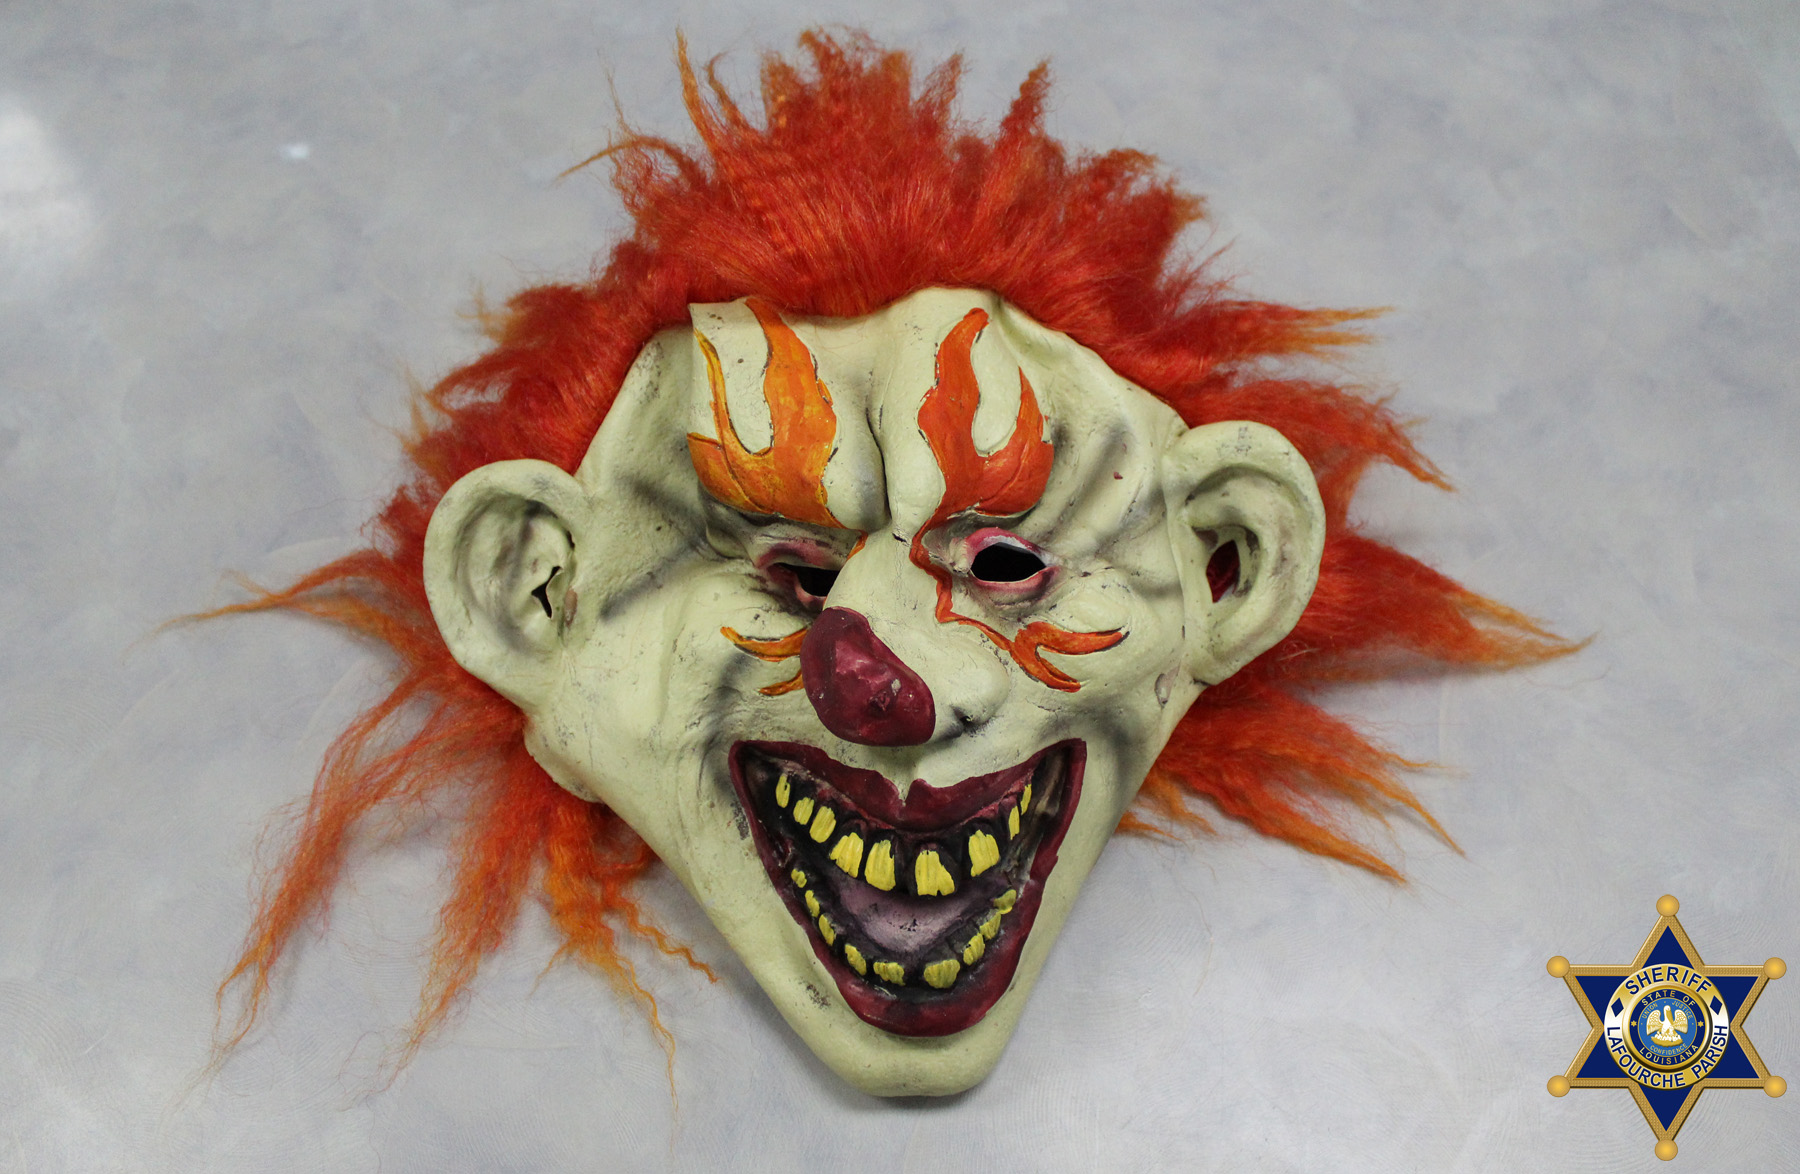 Clown Mask Worn By Students